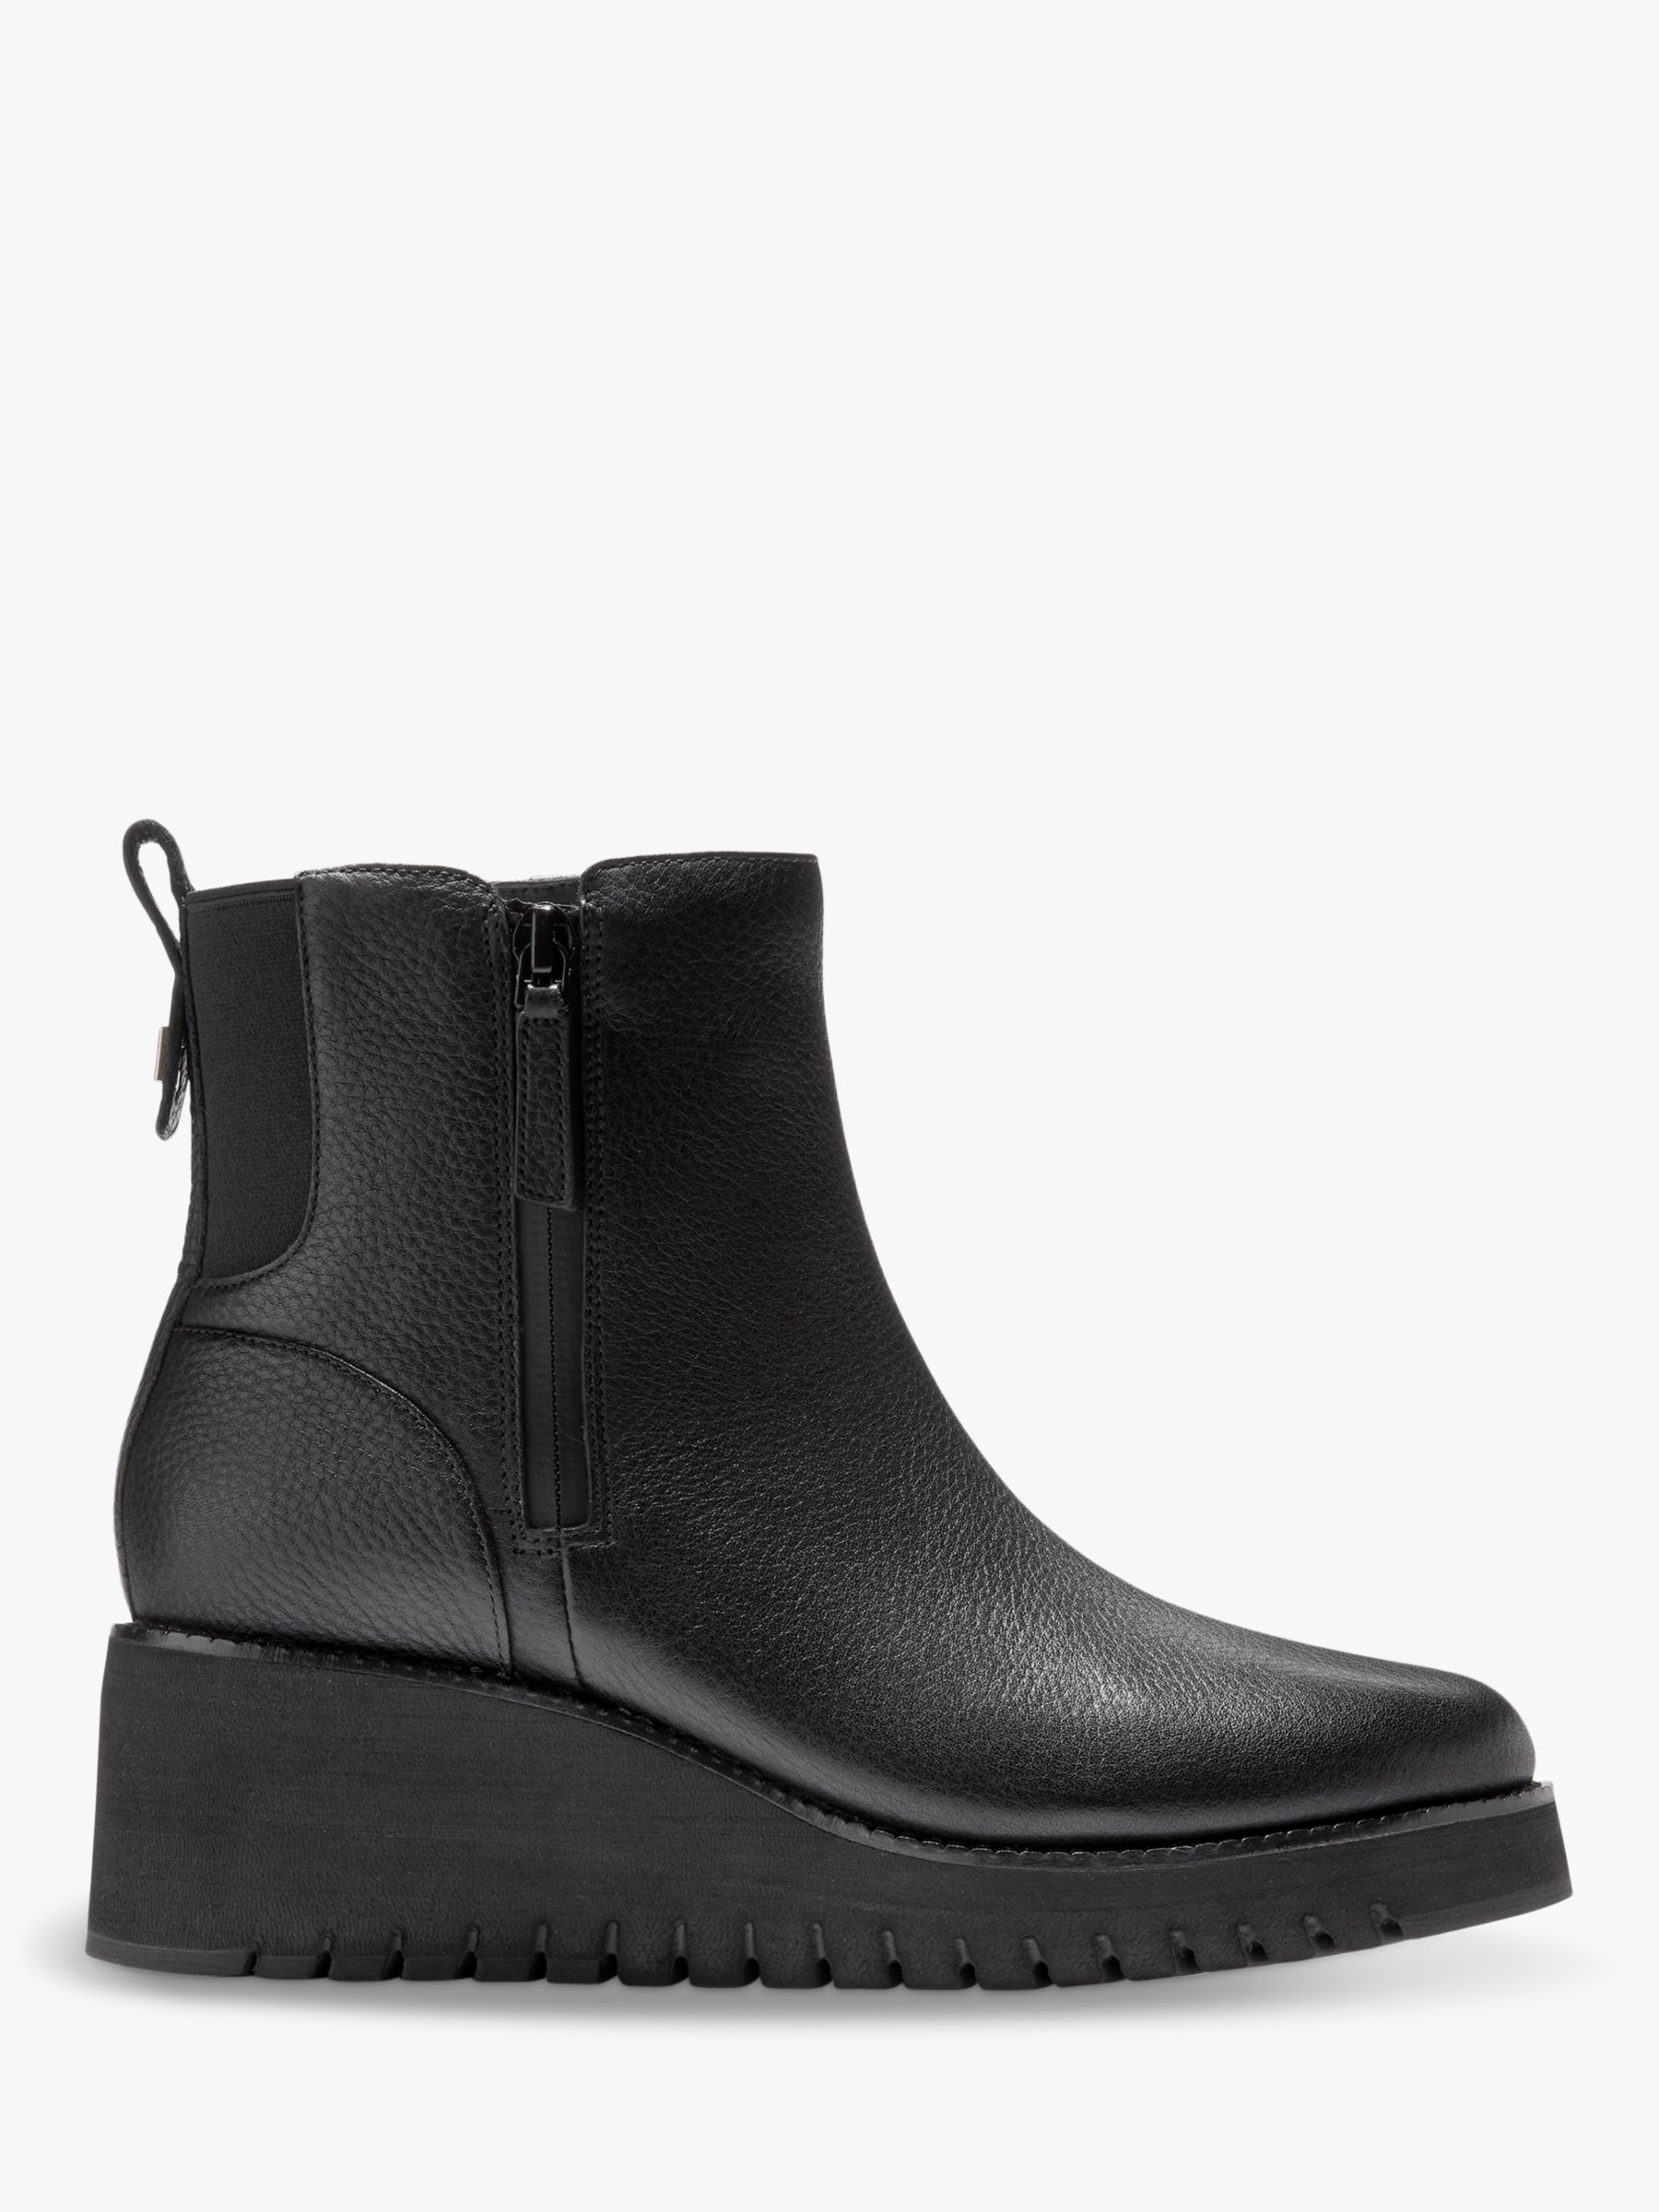 Cole Haan ZEROGRAND City Wedge Side Zip Ankle Boots, Black at John ...